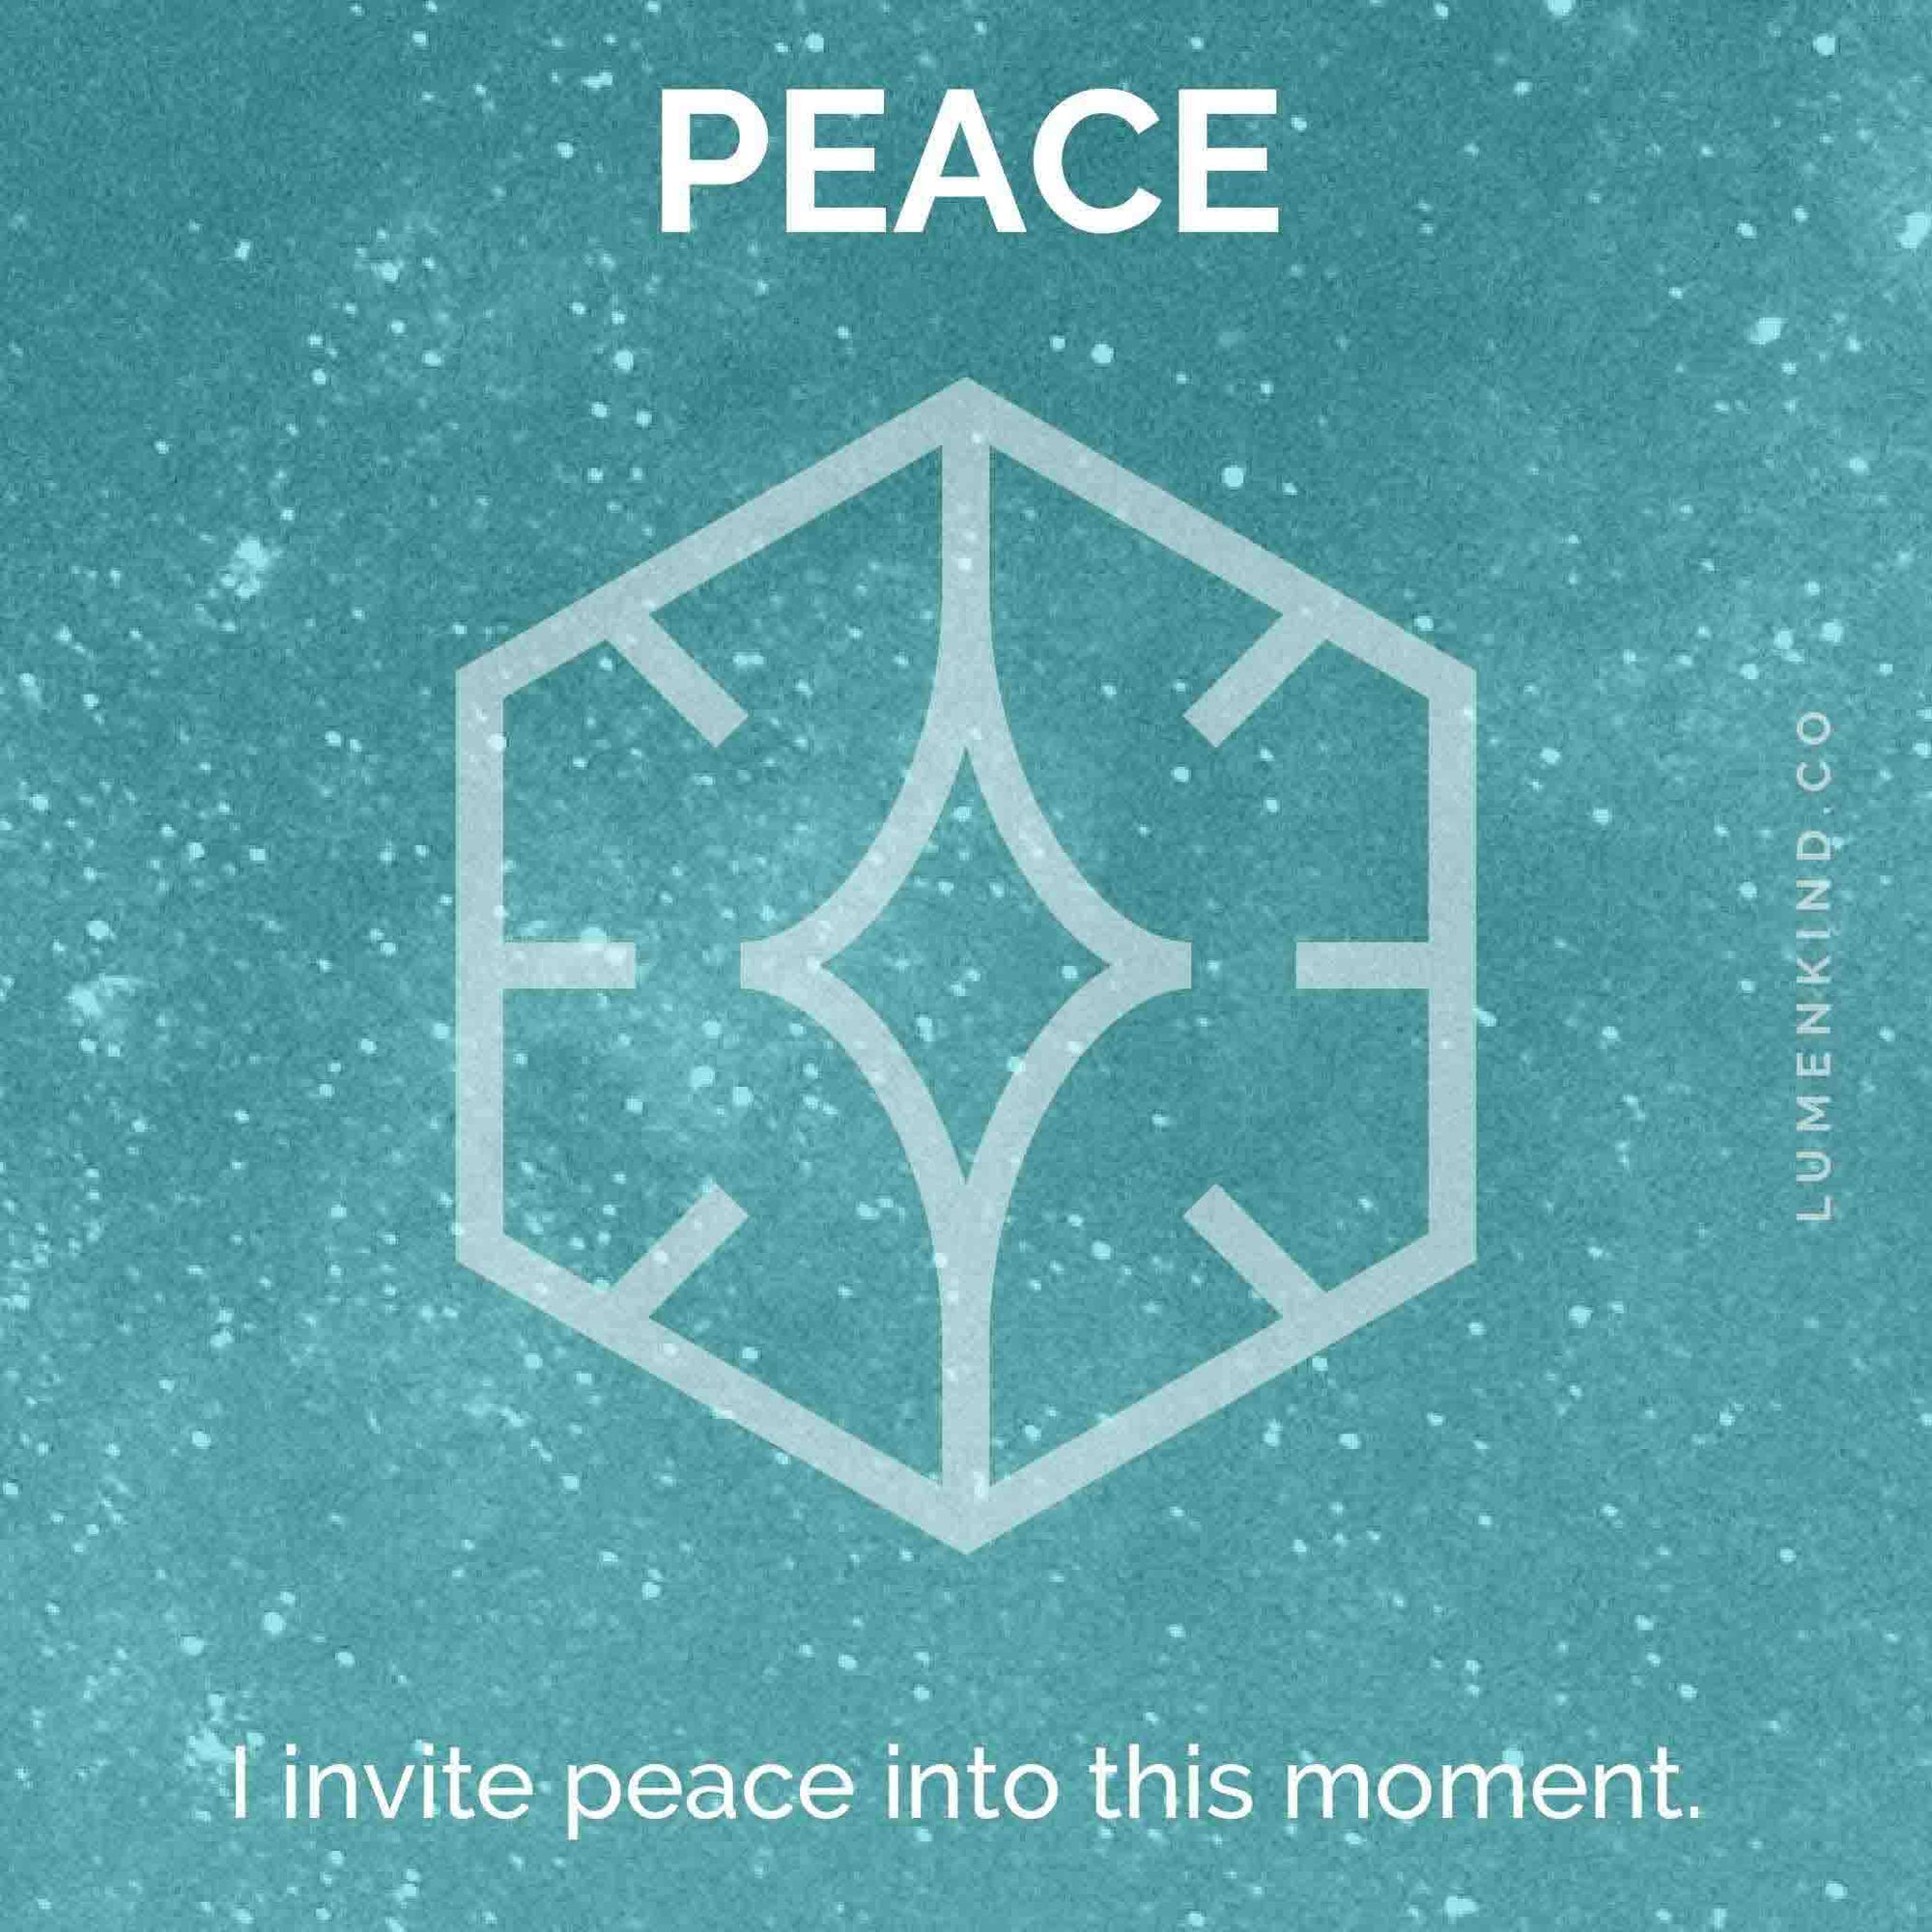 The suggested intention is PEACE. I invite peace into this moment.